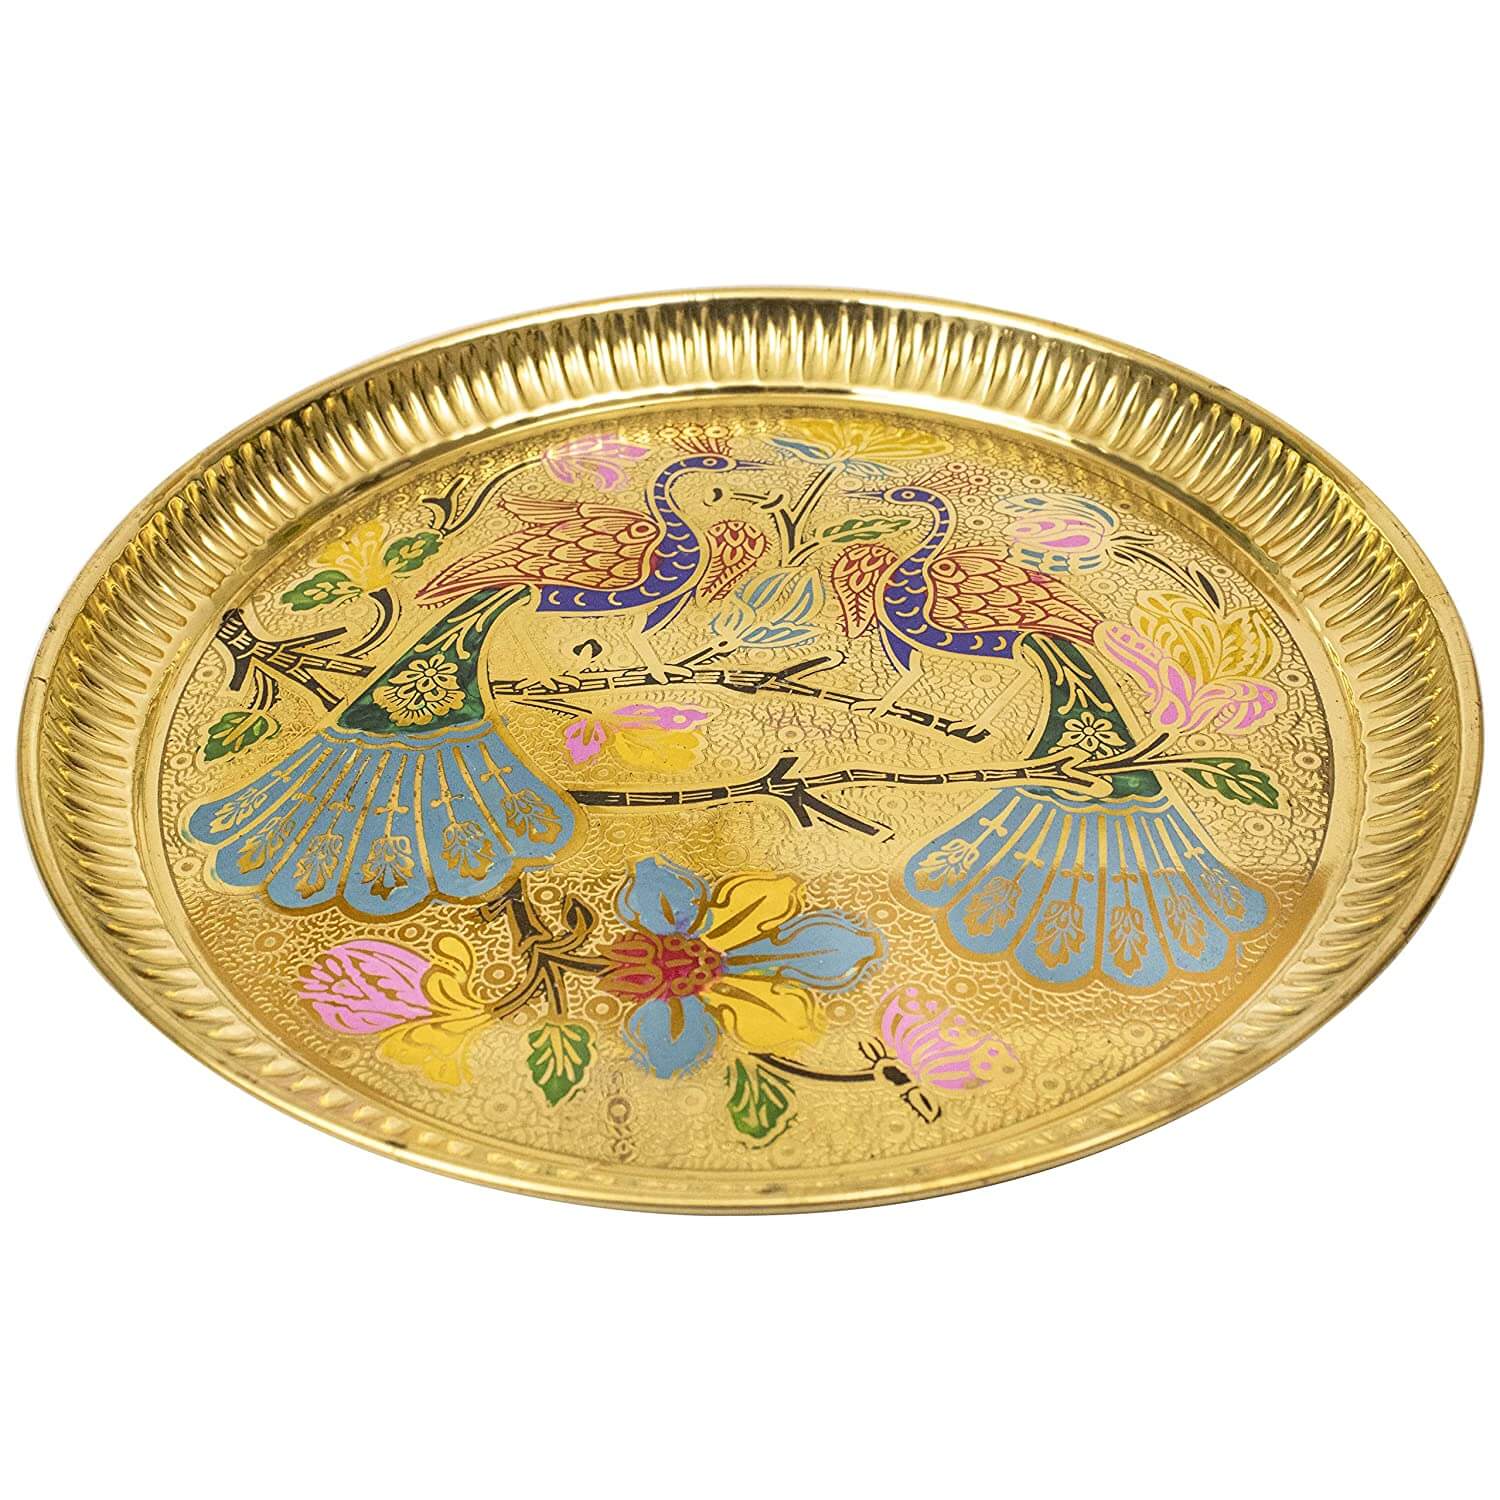 Brass 9 Inch Peacock Design Pooja Thali, Traditional Handcrafted Aarti Plate, Gifts, home decor, karwa chauth, wedding, return gifts Mangal Fashions | Indian Home Decor and Craft